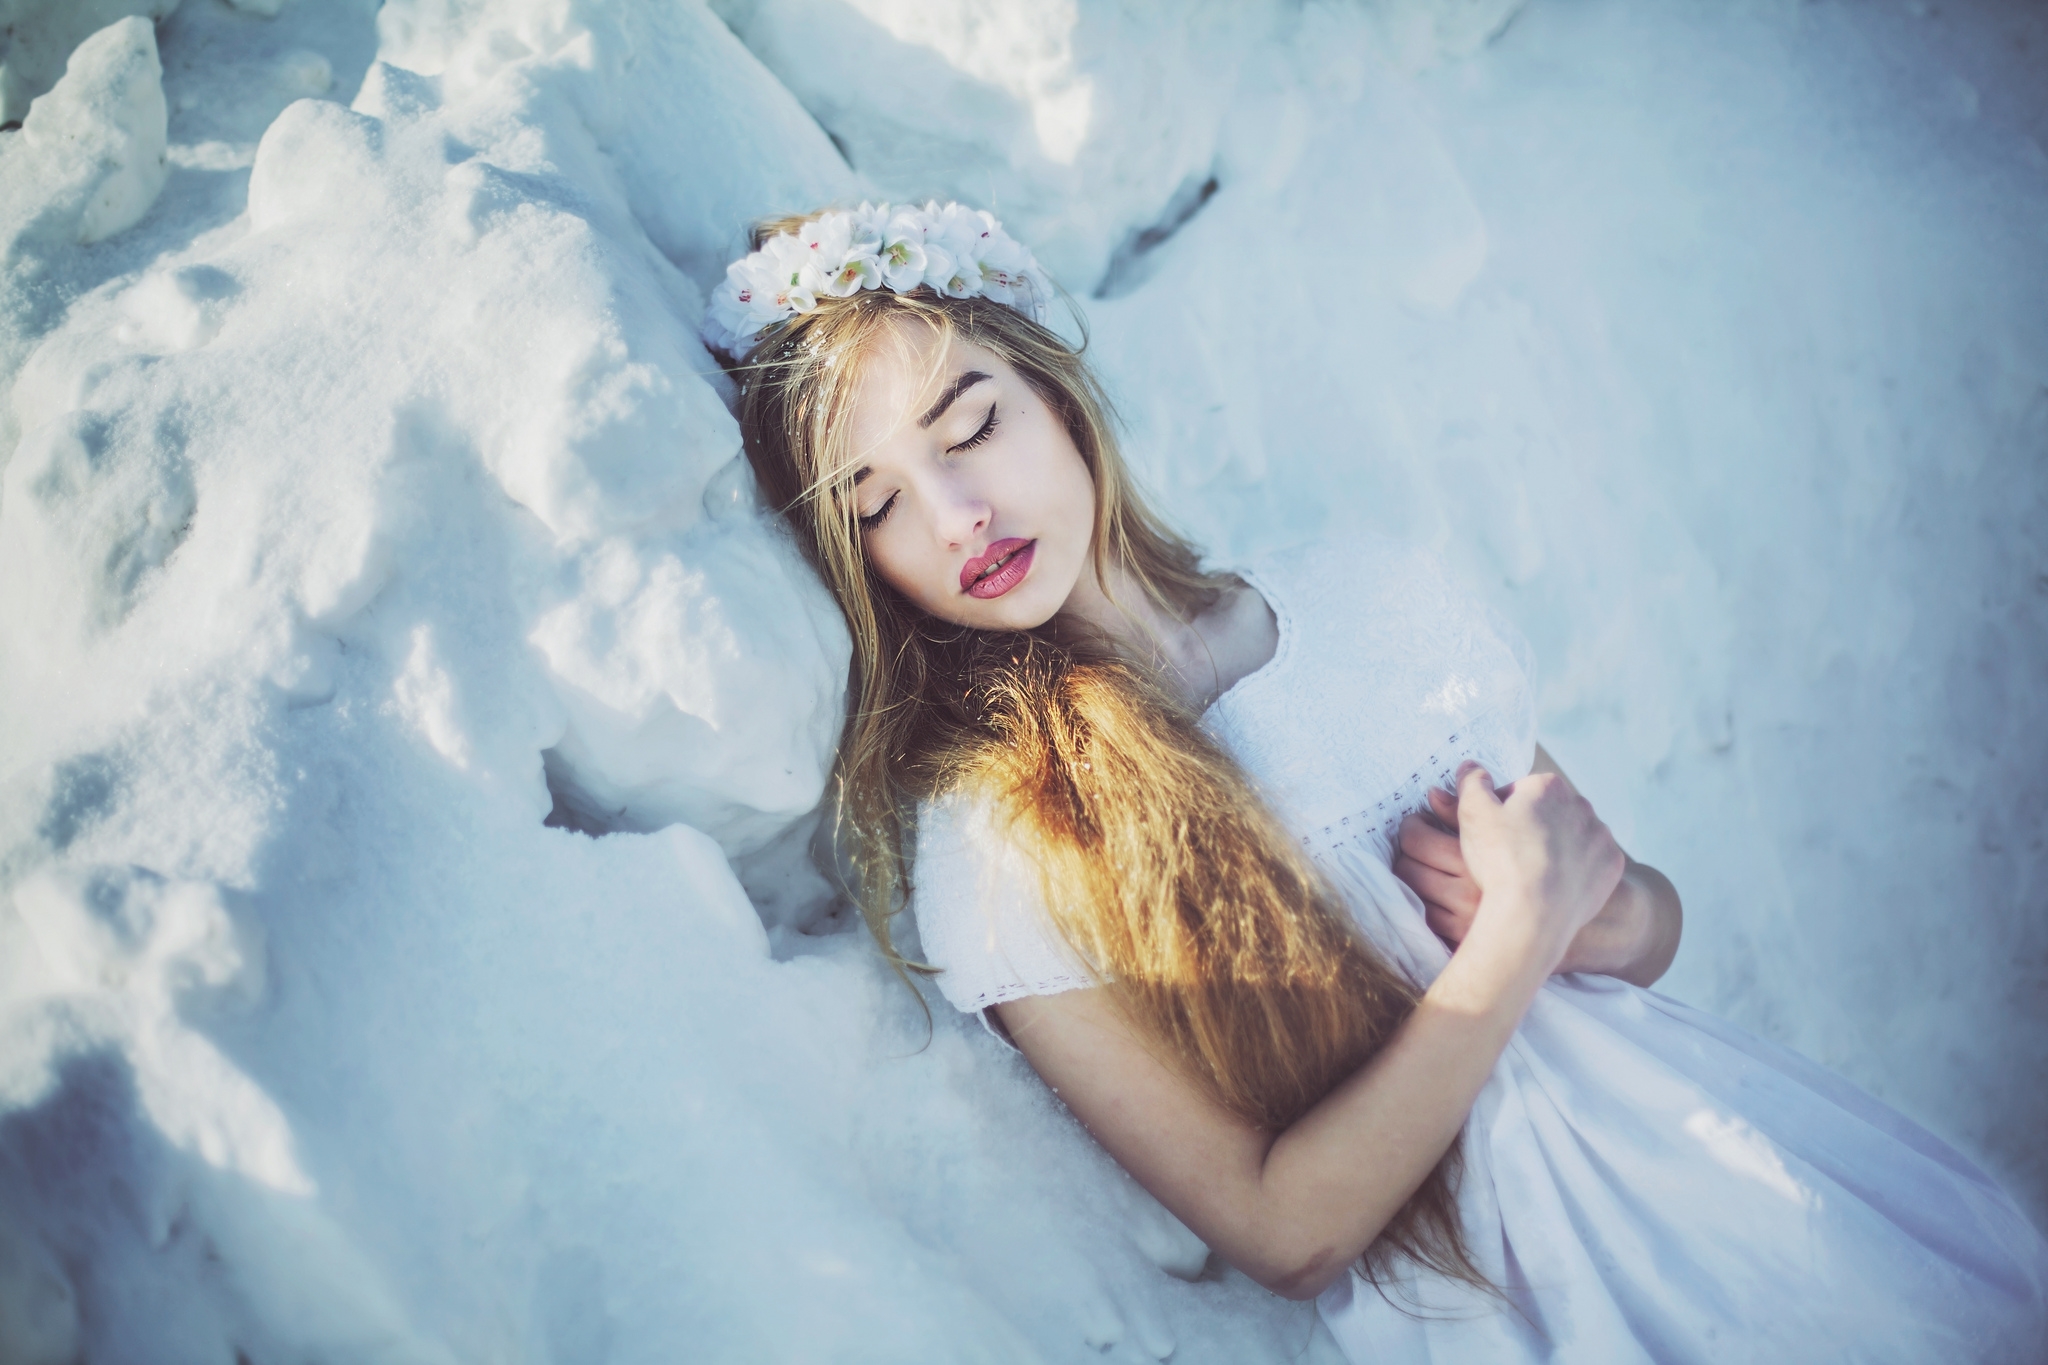 Download wallpaper cold, girl, snow, makeup, blonde, wreath, section mood i...